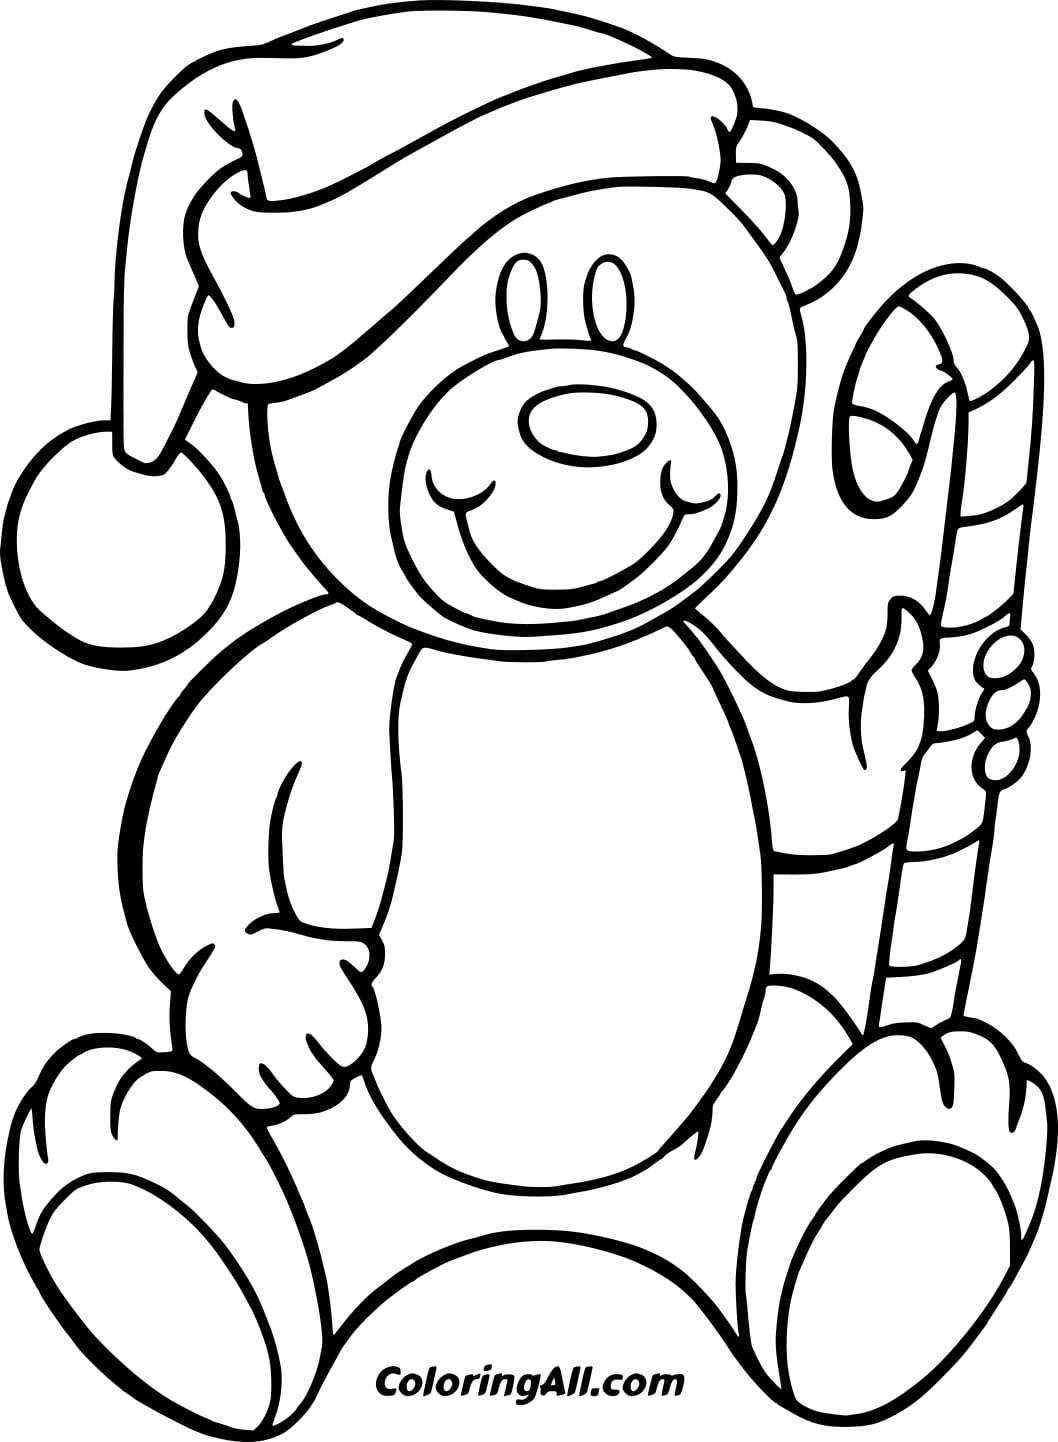 Bear In A Christmas Hat Holds A Candy Cane Coloring Page